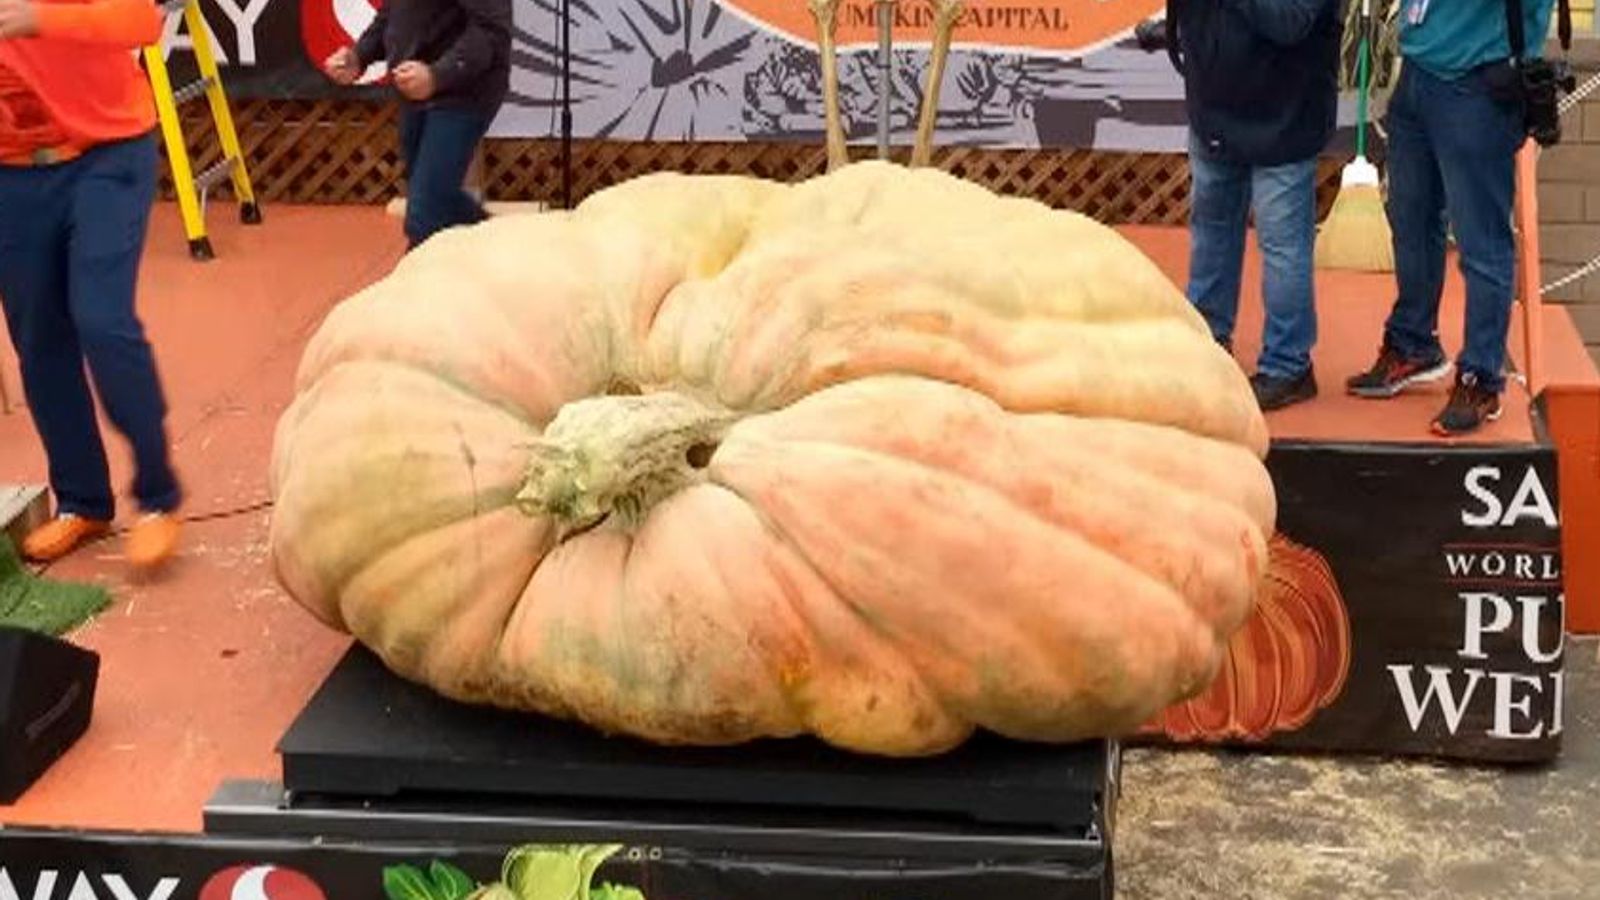 US At 1.2 tonnes, this could be the heaviest pumpkin ever seen US